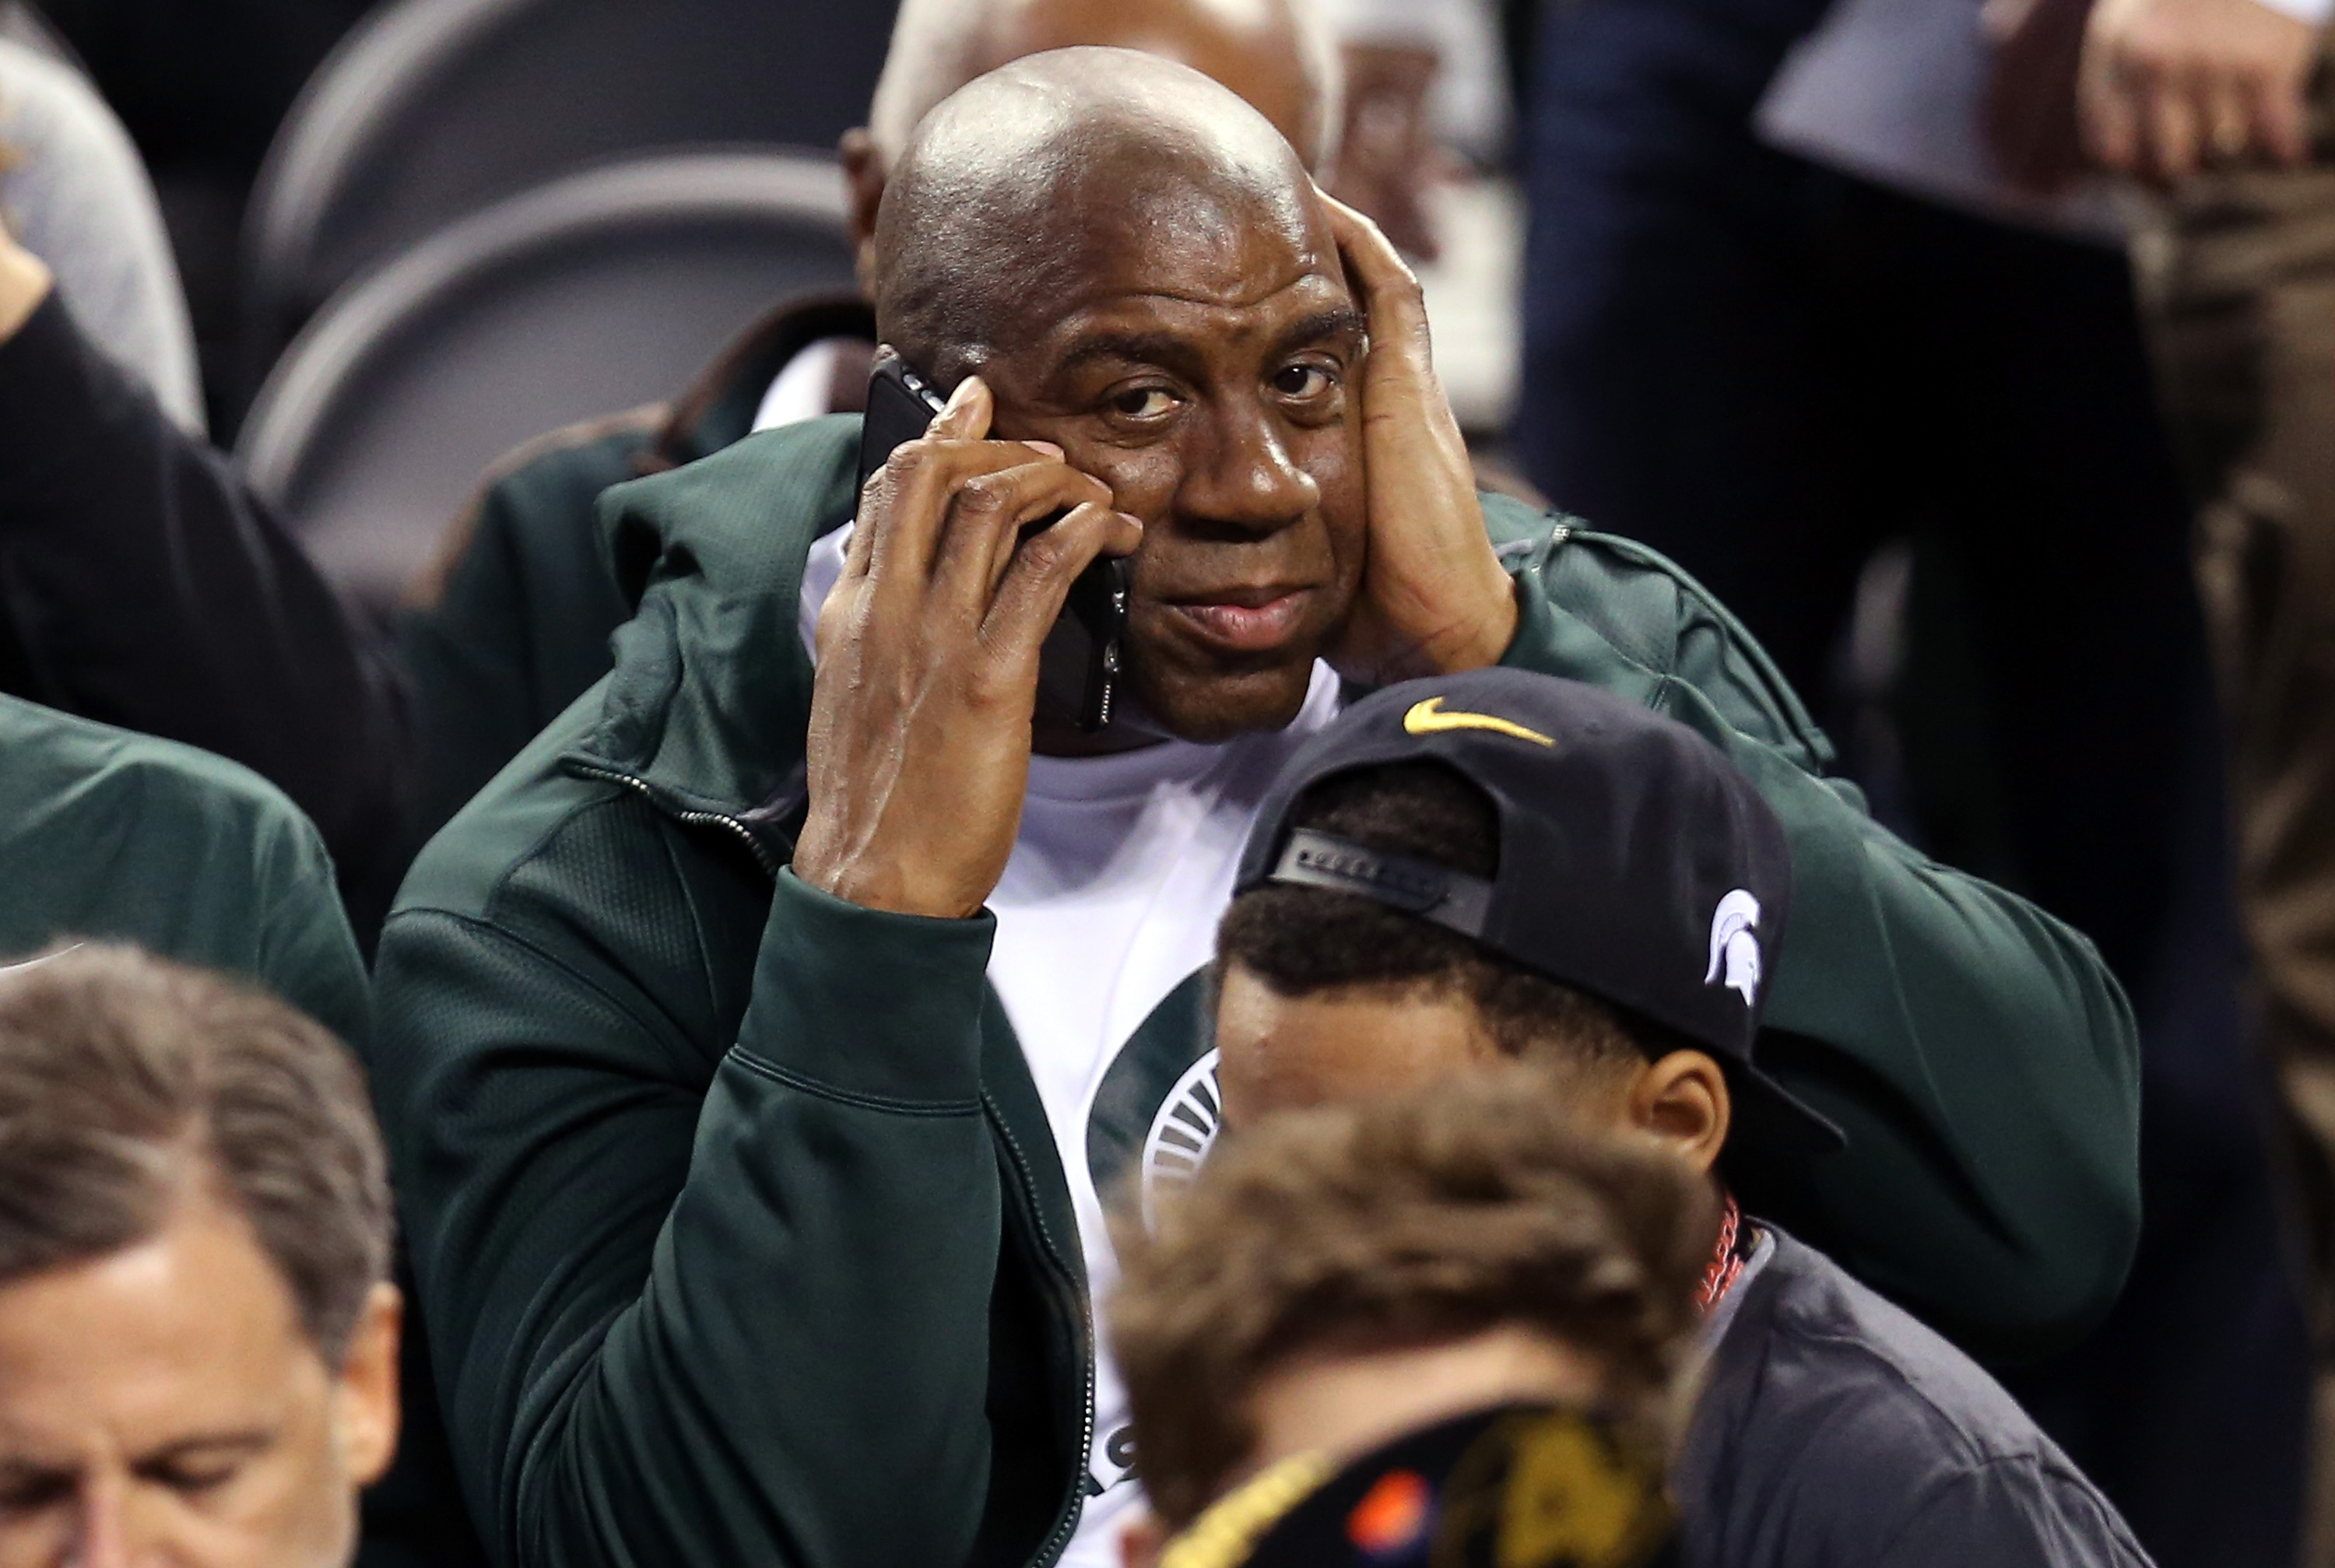 Magic Johnson Finally Revealed the Secret Behind His Hilarious Twitter Account